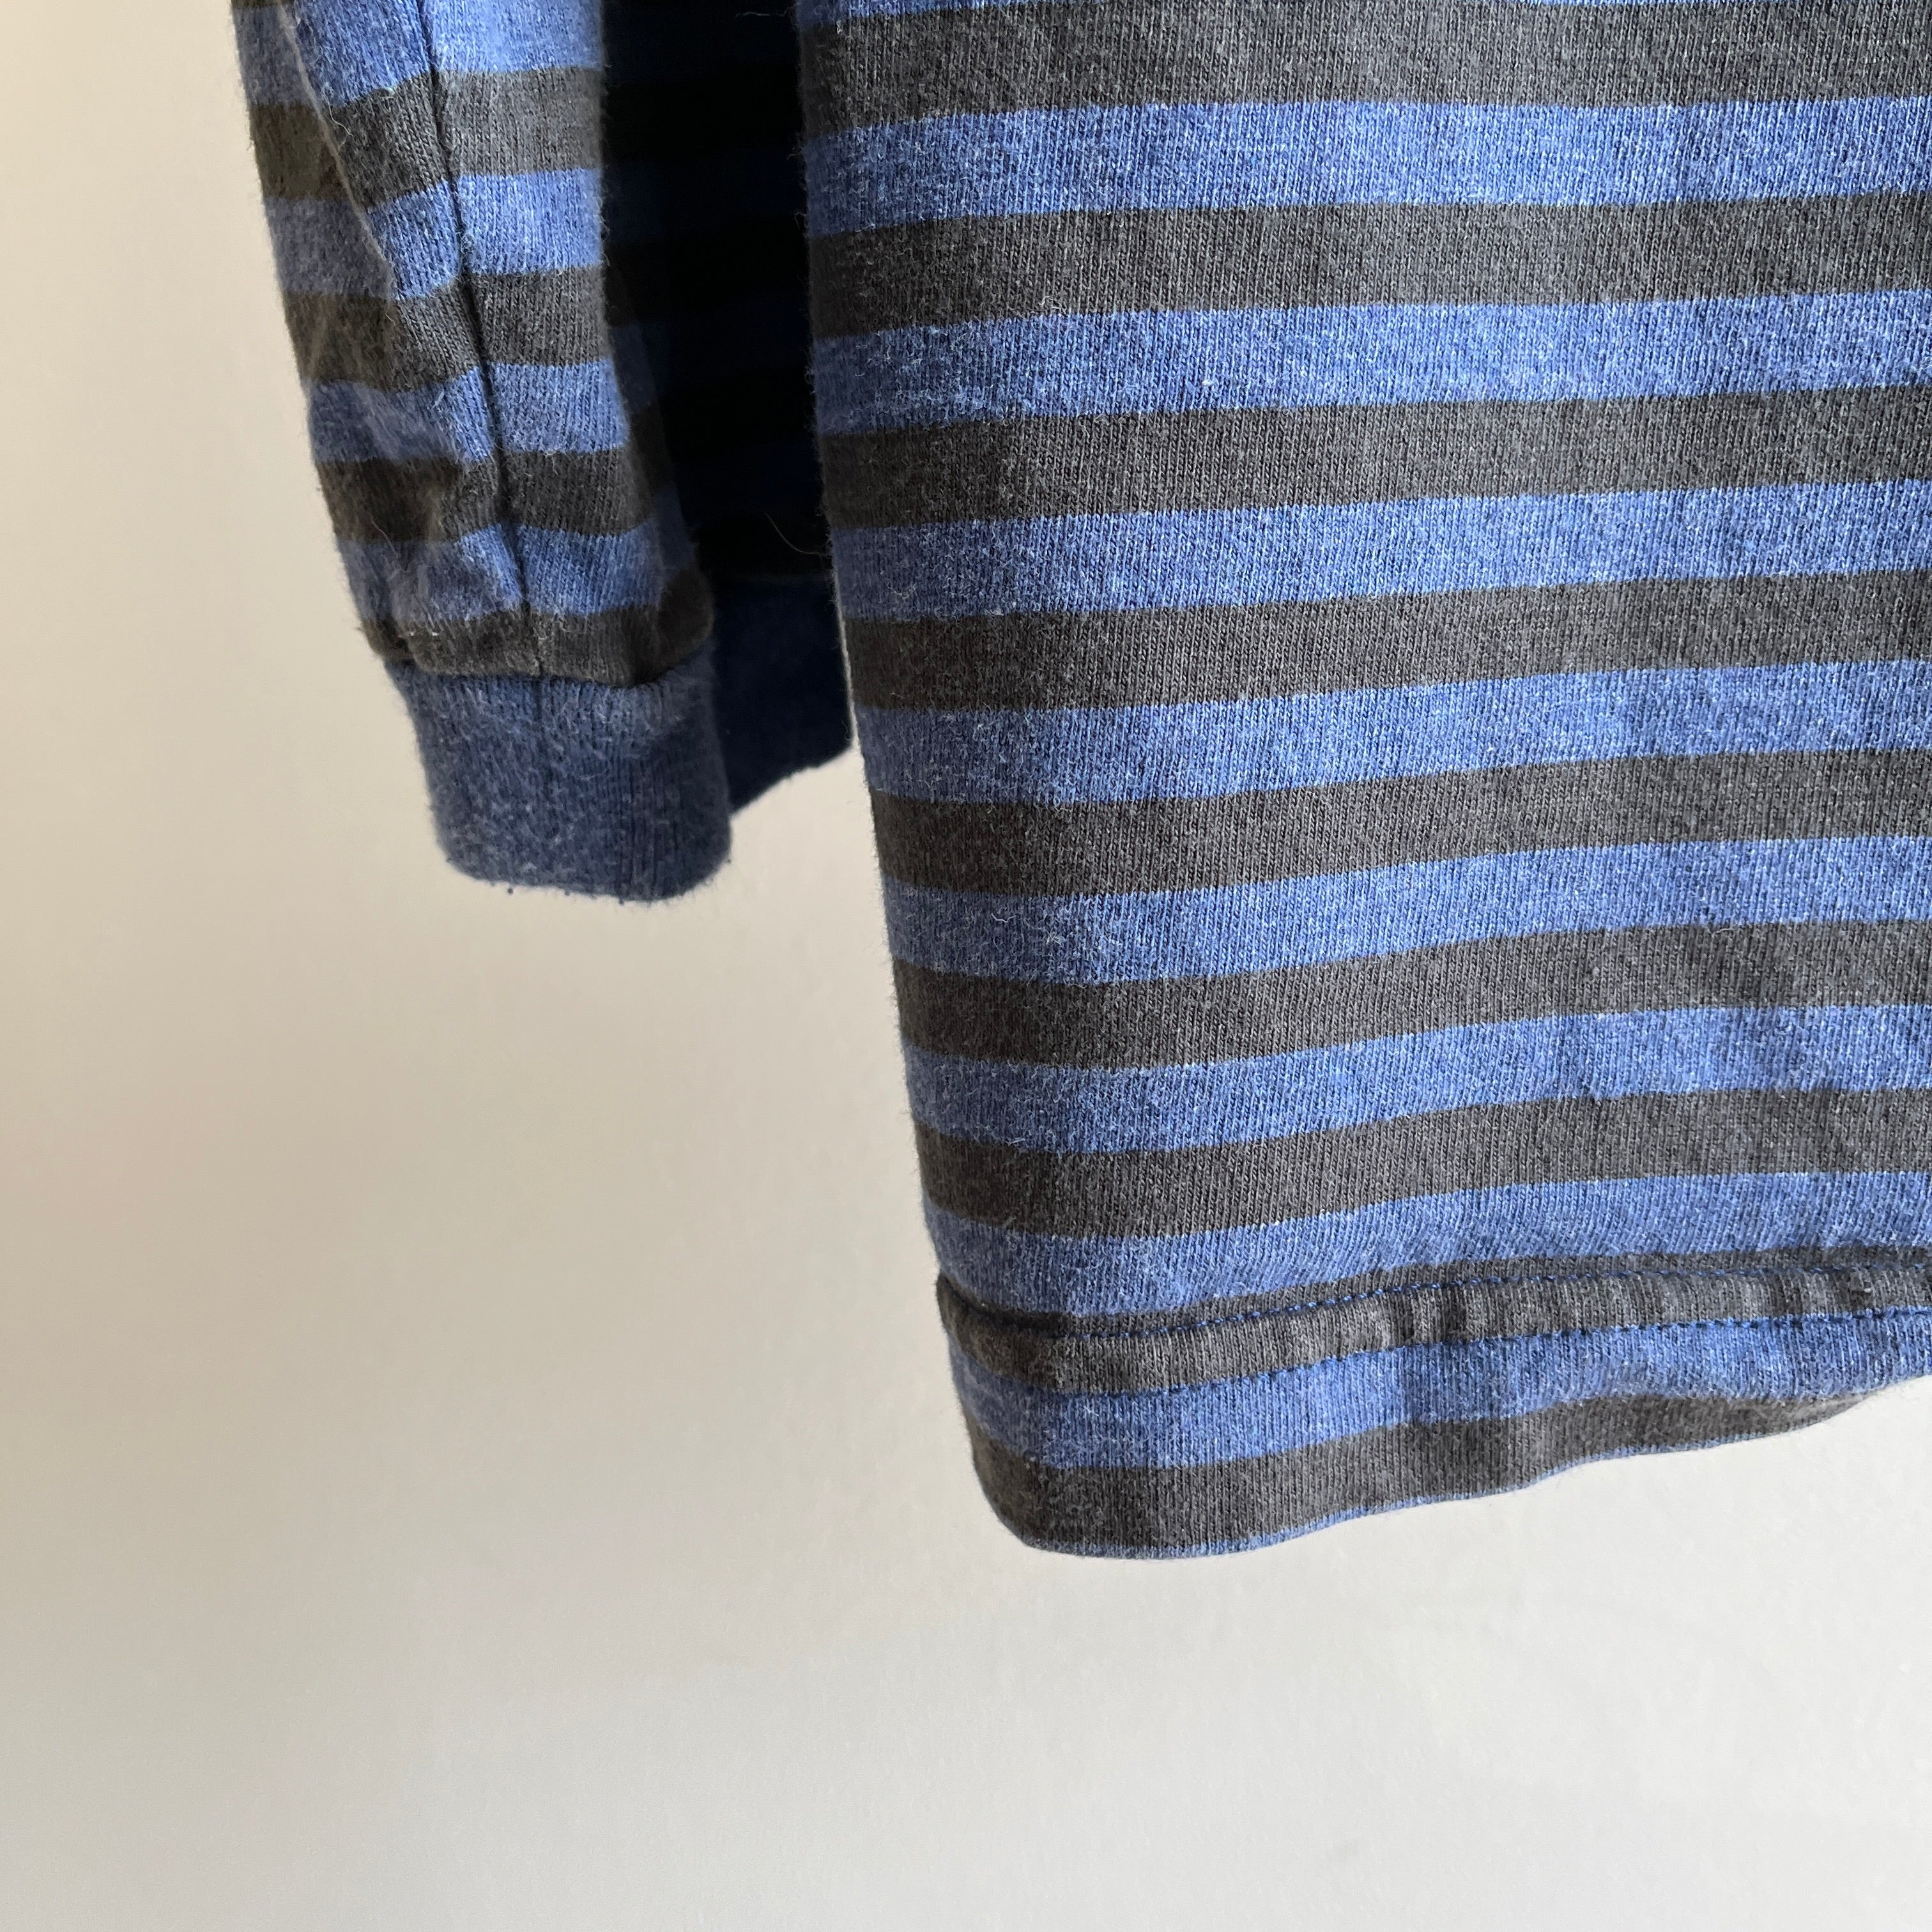 1990s GUESS STRIPED COTTON Long Sleeve T-Shirt